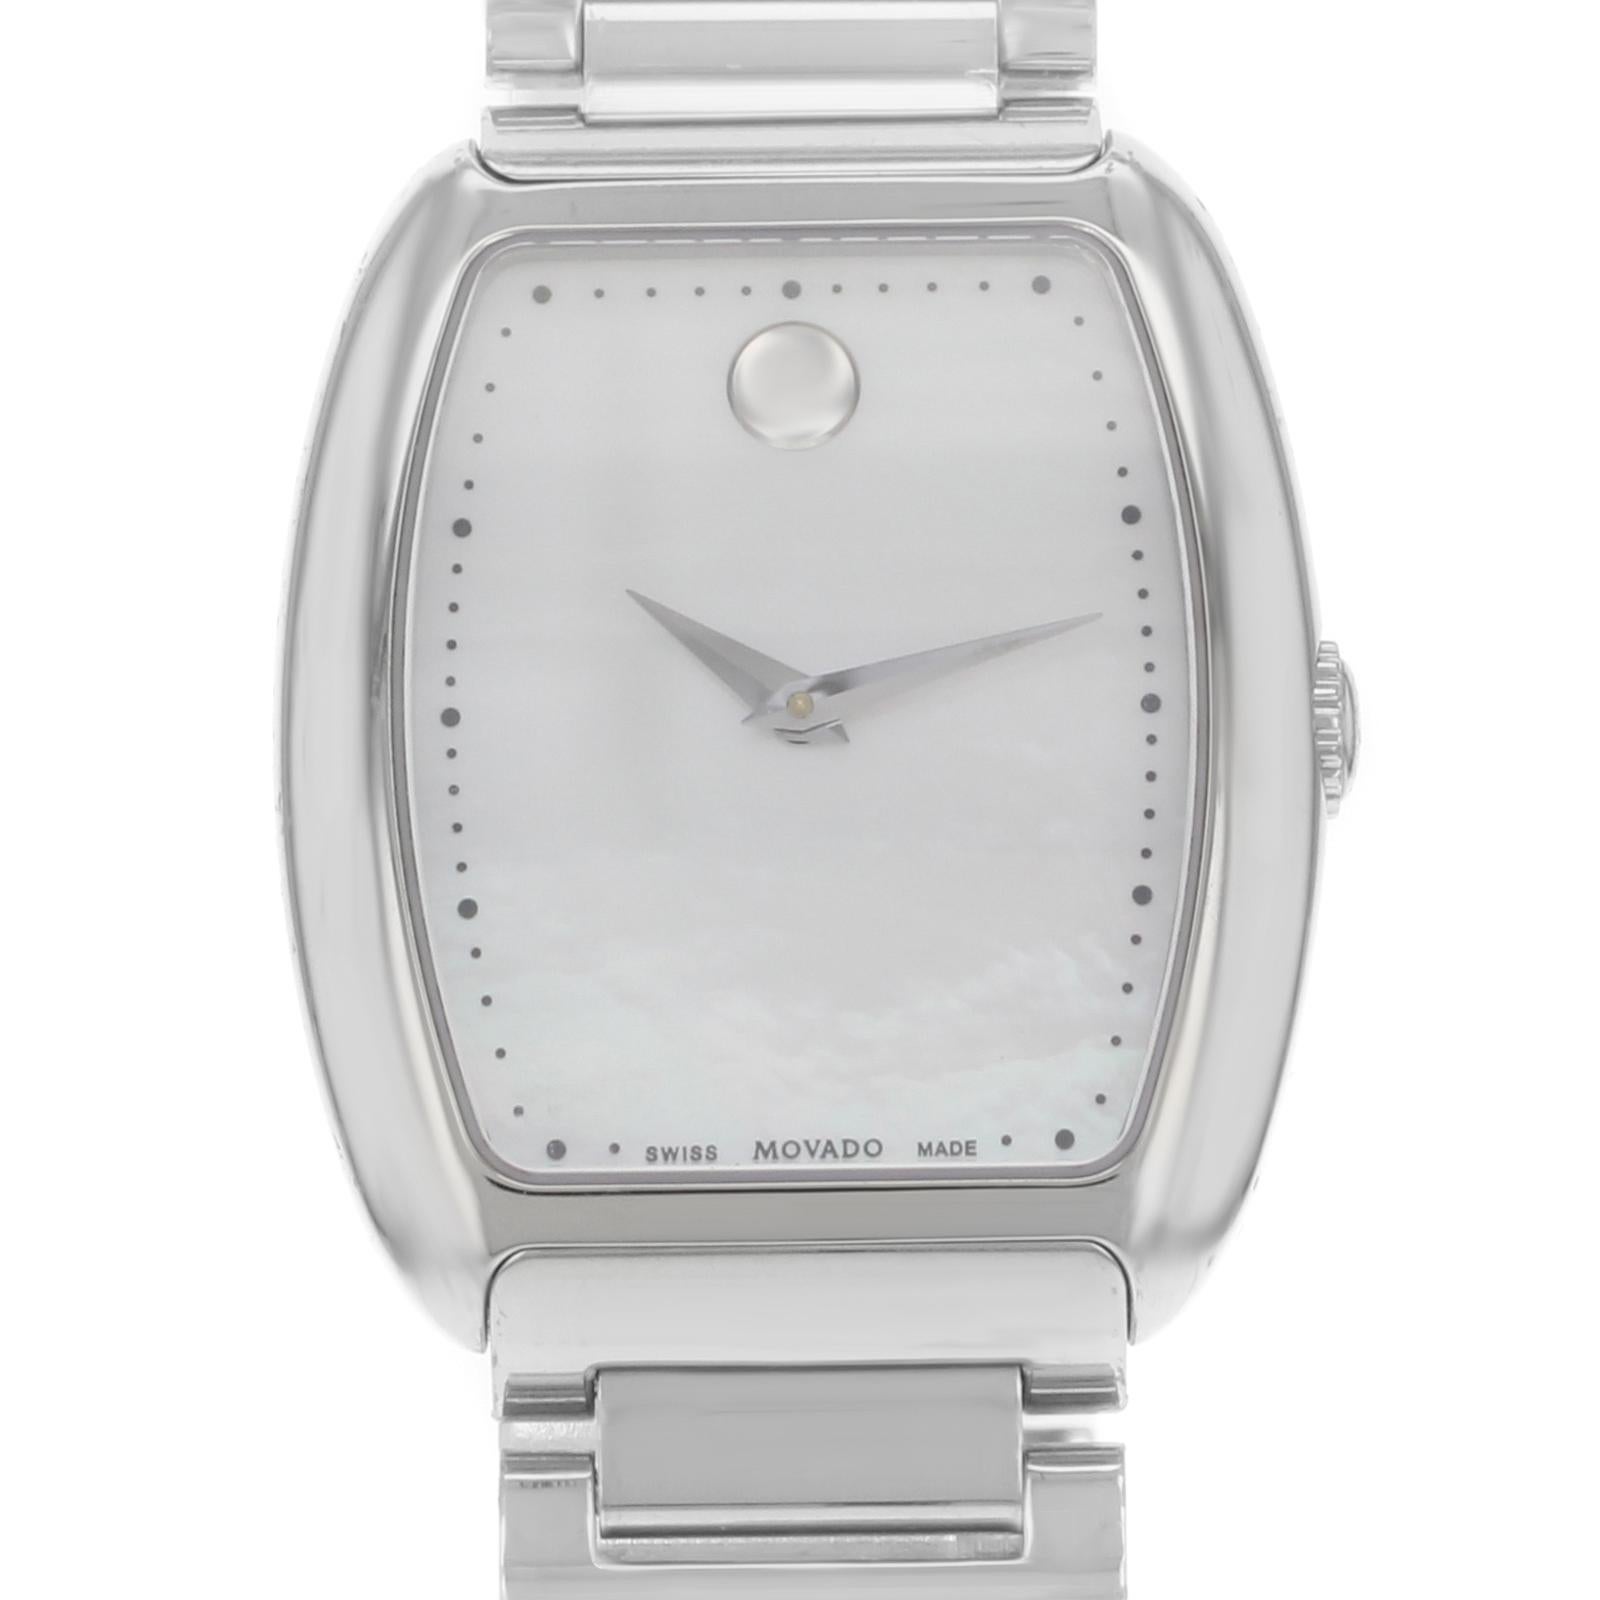 This pre-owned Movado Concerto 0606547 is a beautiful Ladies timepiece that is powered by a quartz movement which is cased in a stainless steel case. It has a tonneau shape face, dial and has hand unspecified style markers. It is completed with a